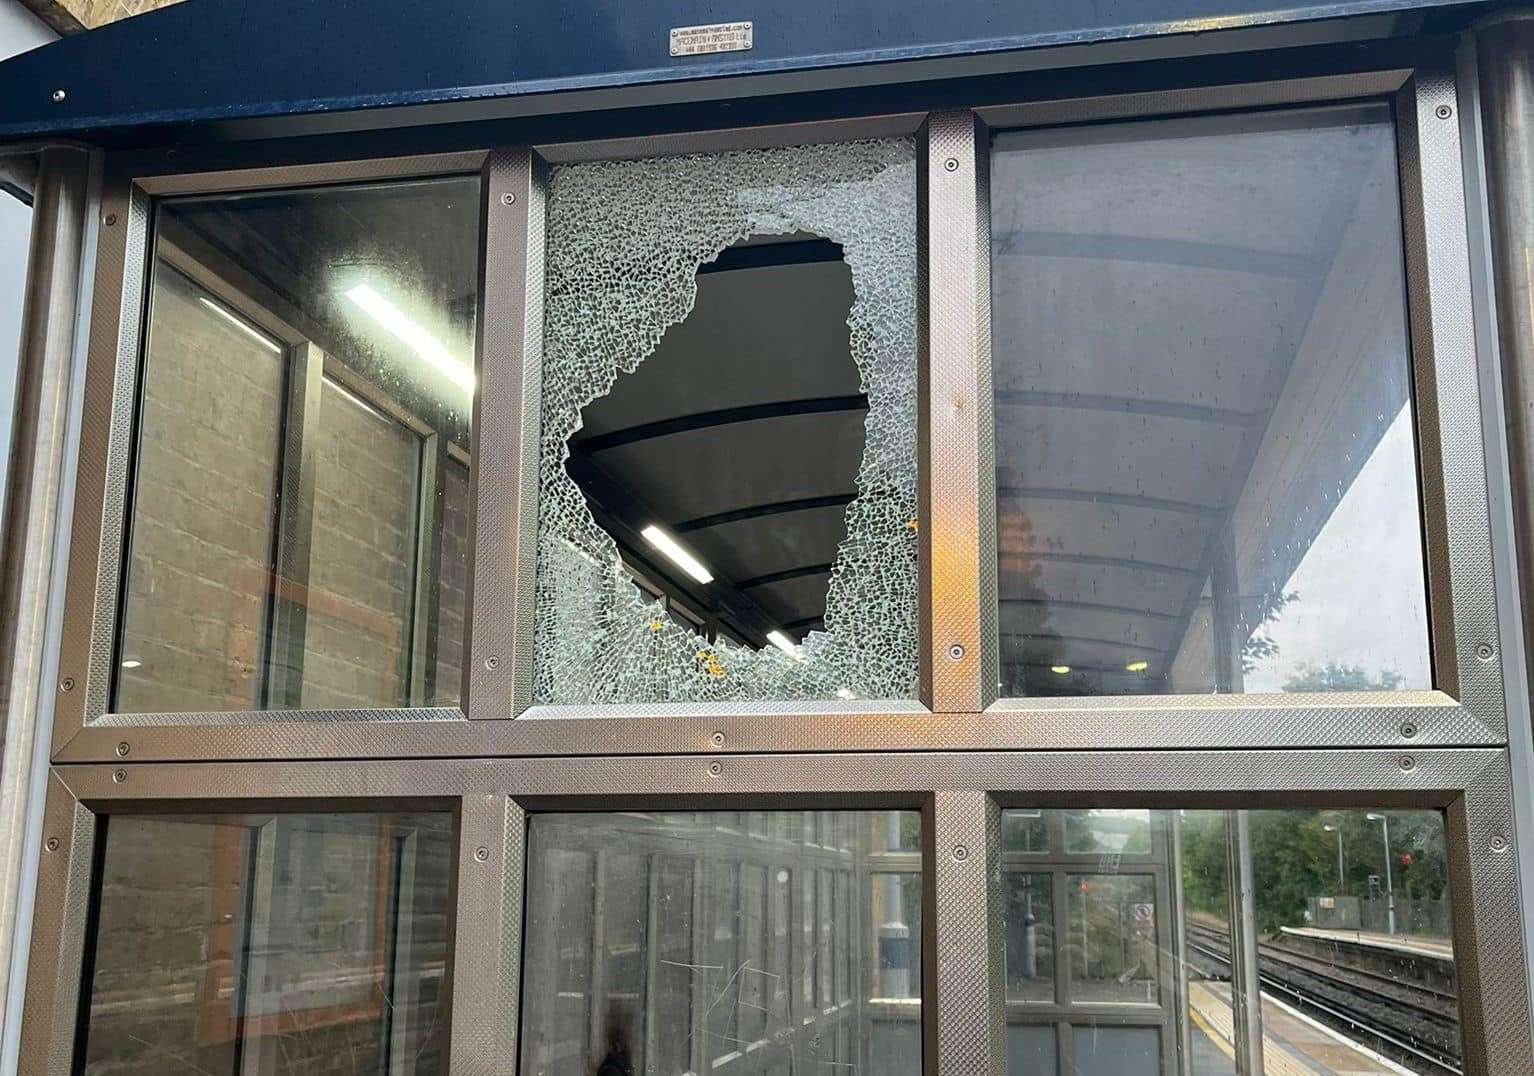 One of the windows at the station shelter has been smashed